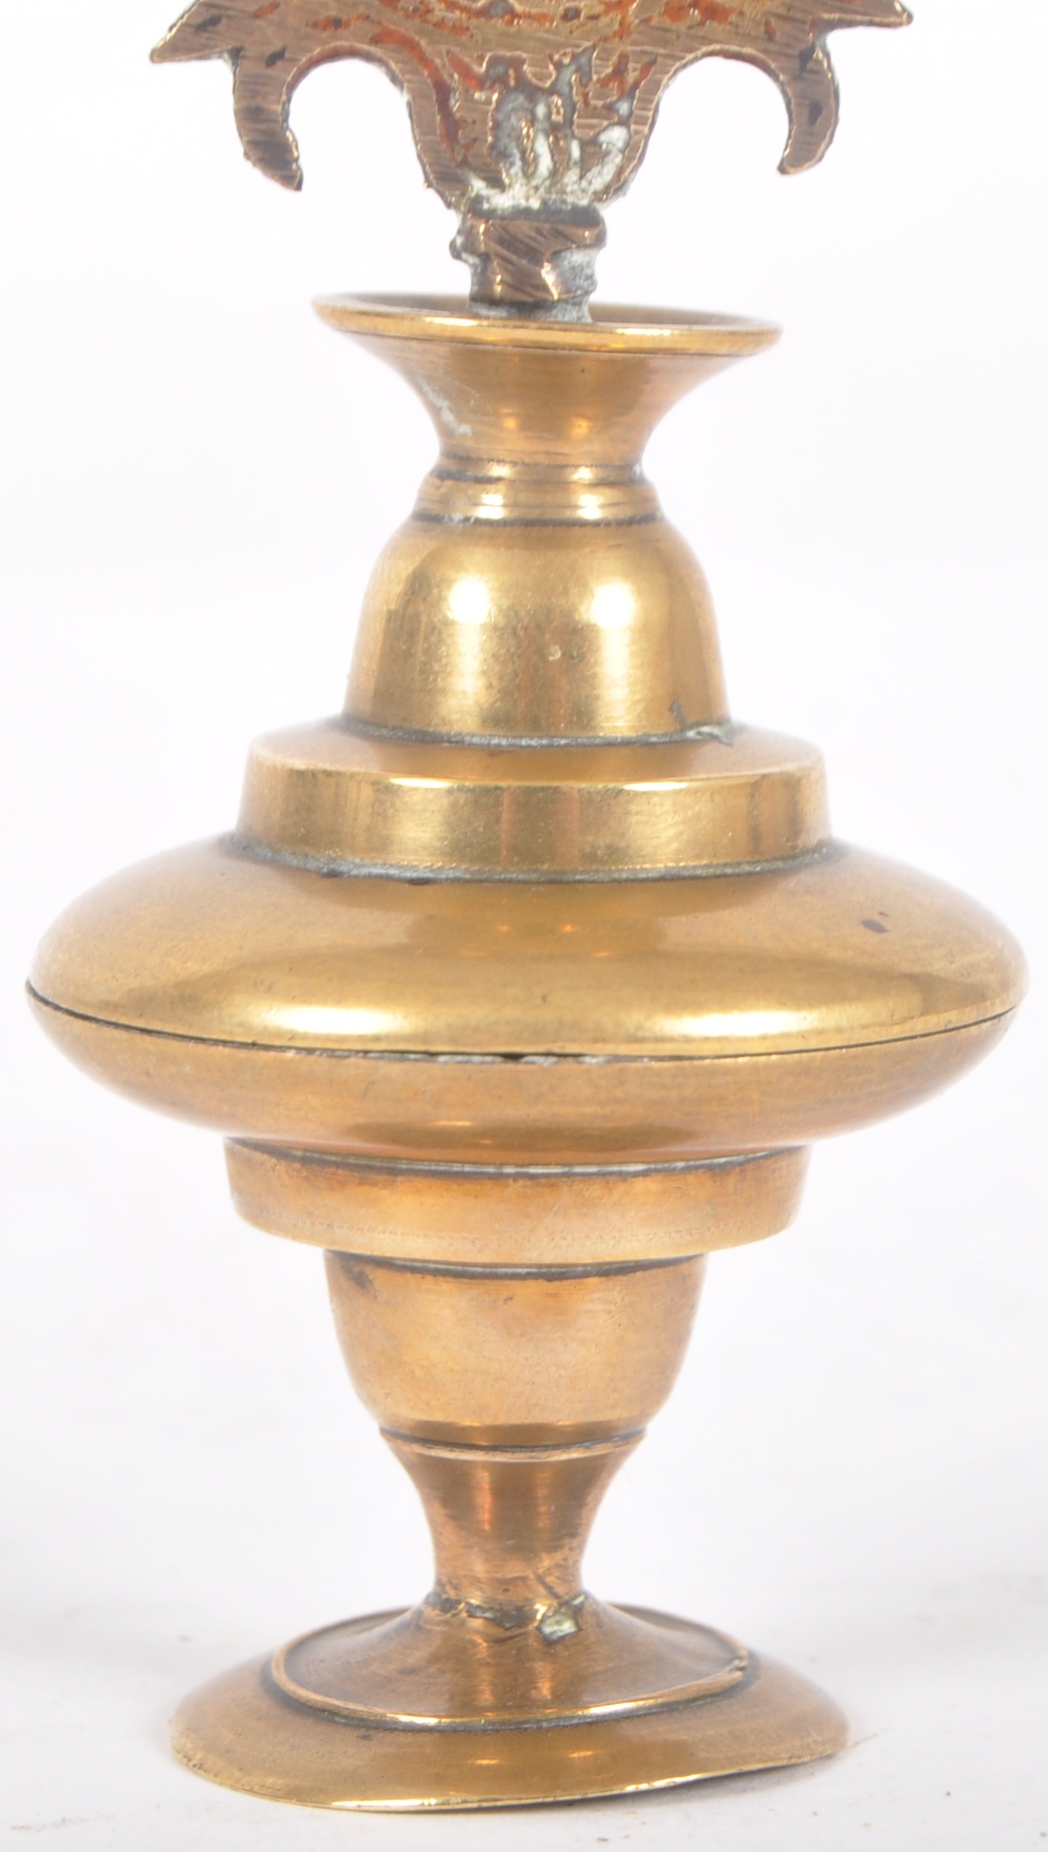 EARLY 20TH CENTURY PERSIAN BRASS KOHL POT - Image 7 of 8